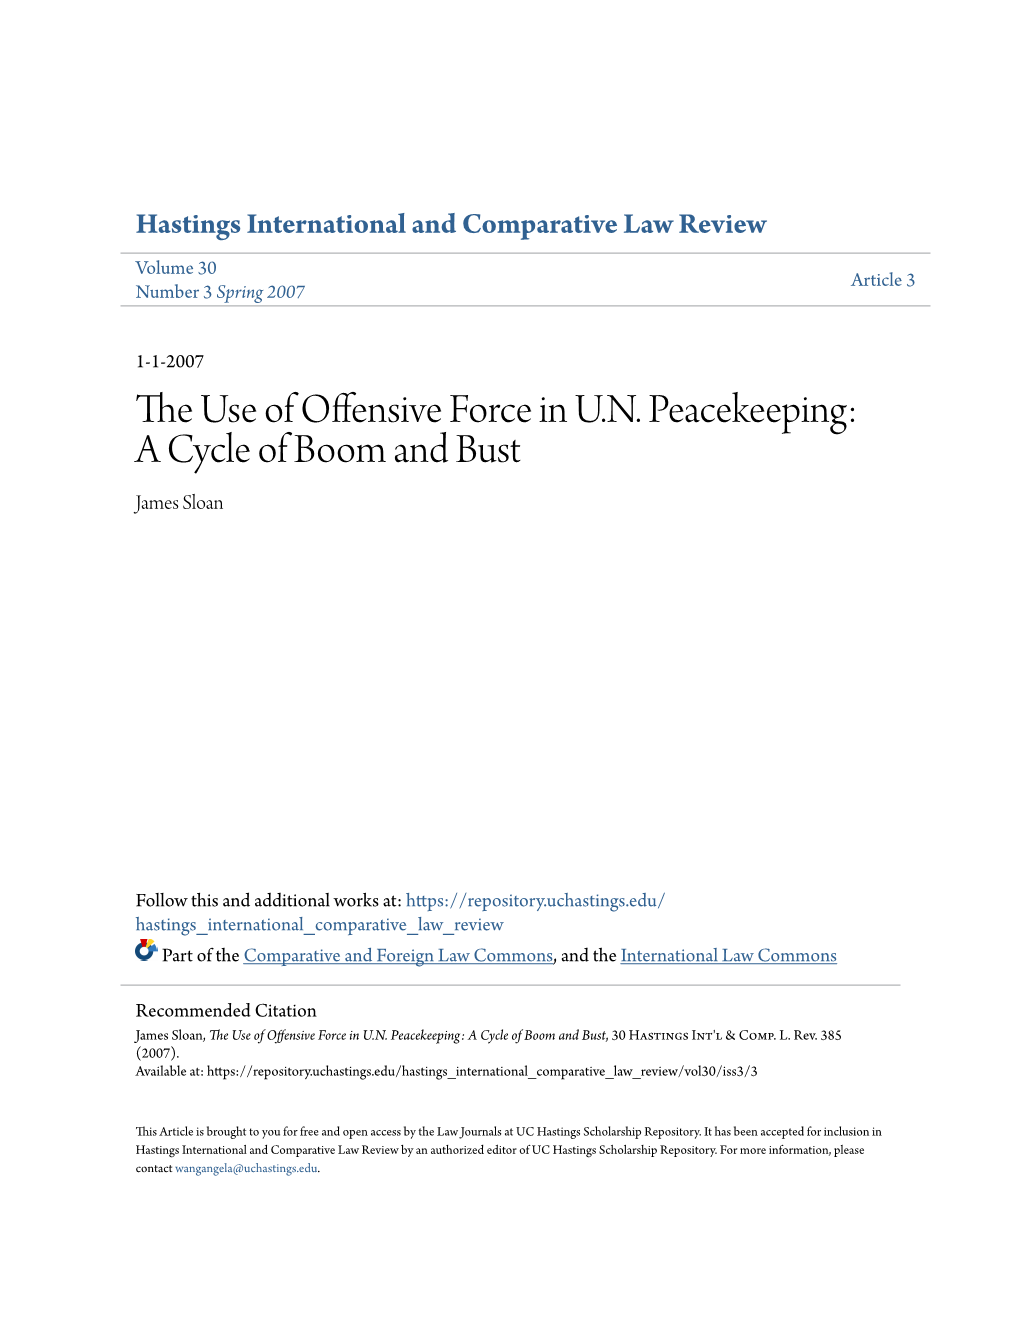 The Use of Offensive Force in UN Peacekeeping